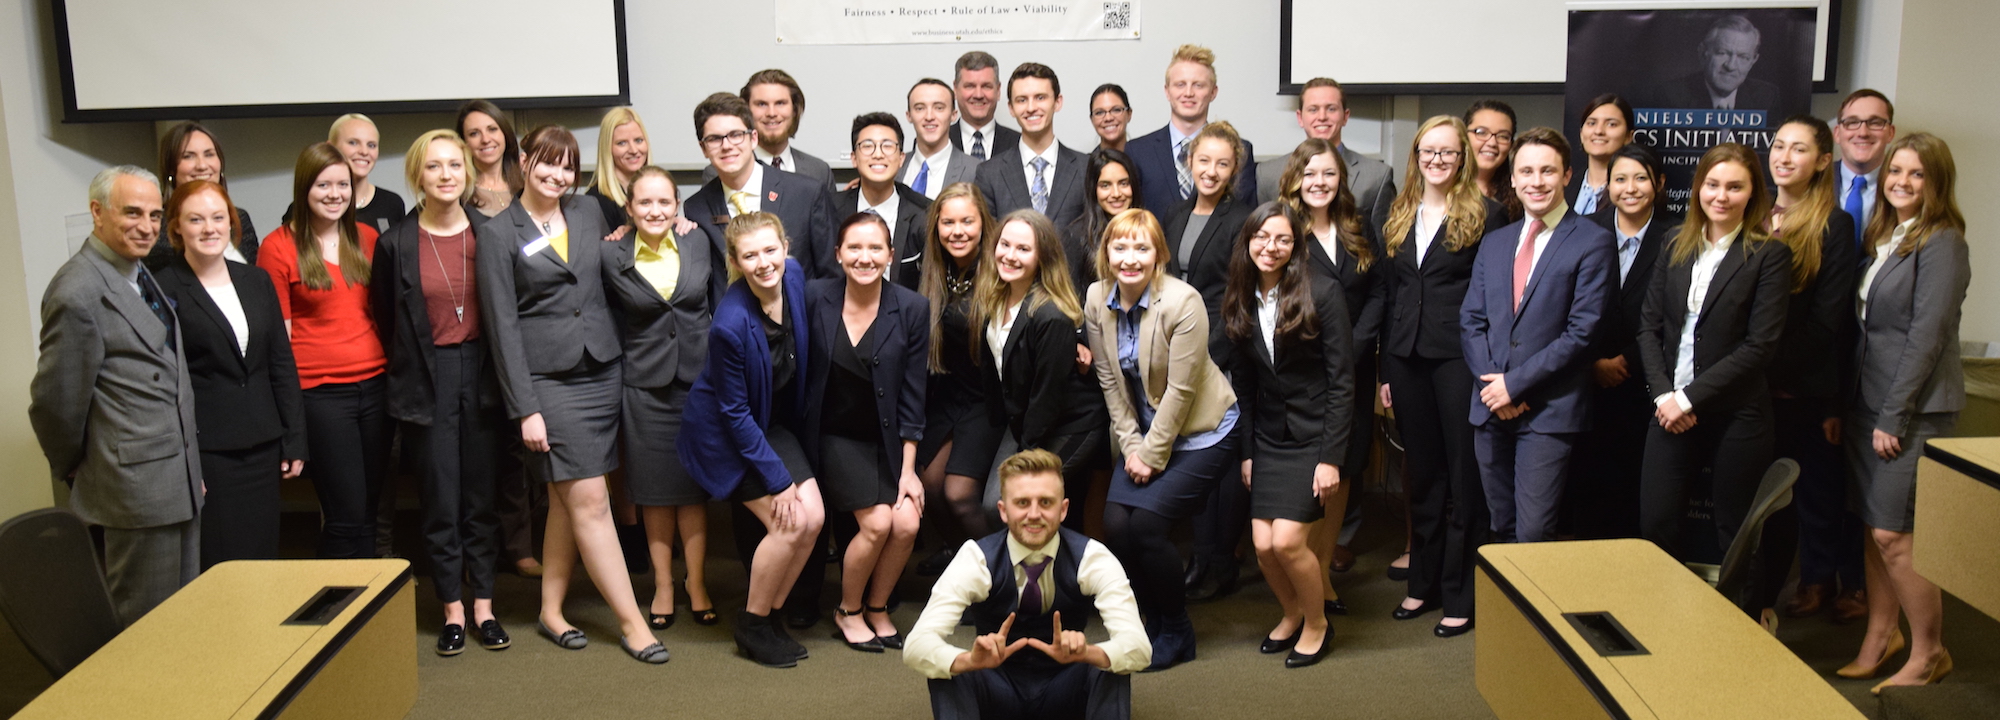 Winners of the Daniels Fund Ethics Initiative Case Competition announced